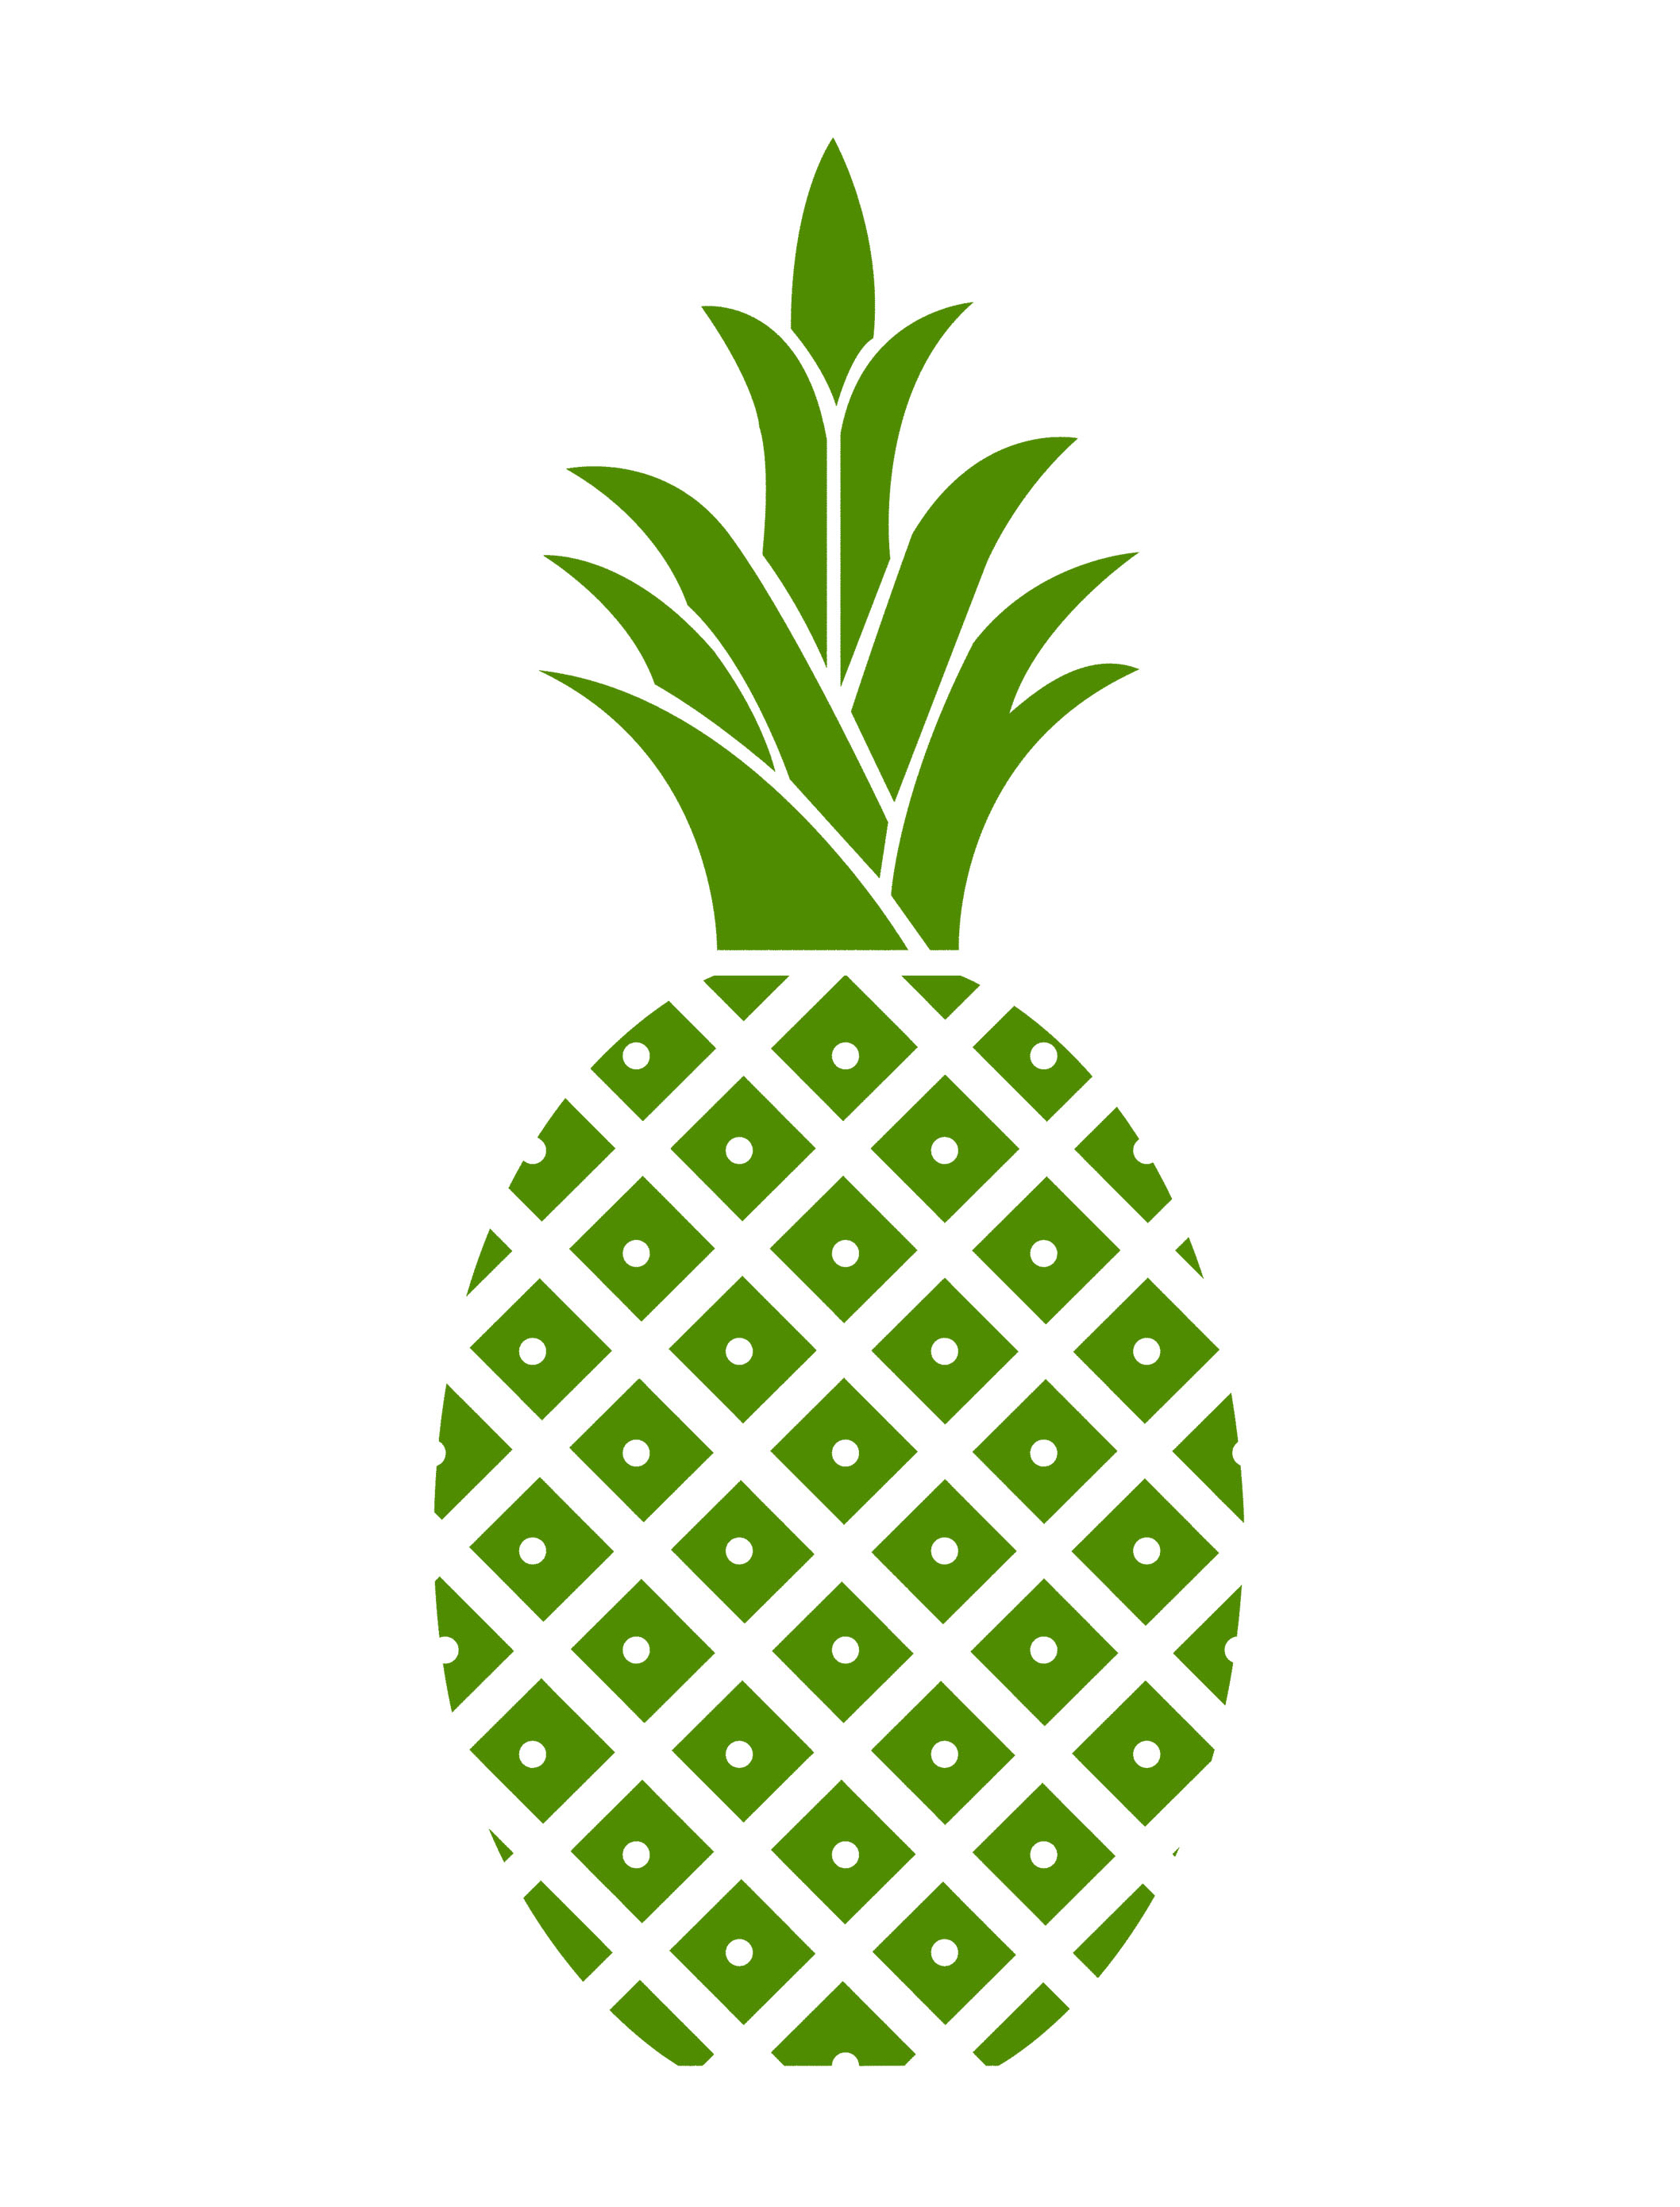 Hospitality Pineapple Green Pineapple Cropped | Free Images at Clker ...